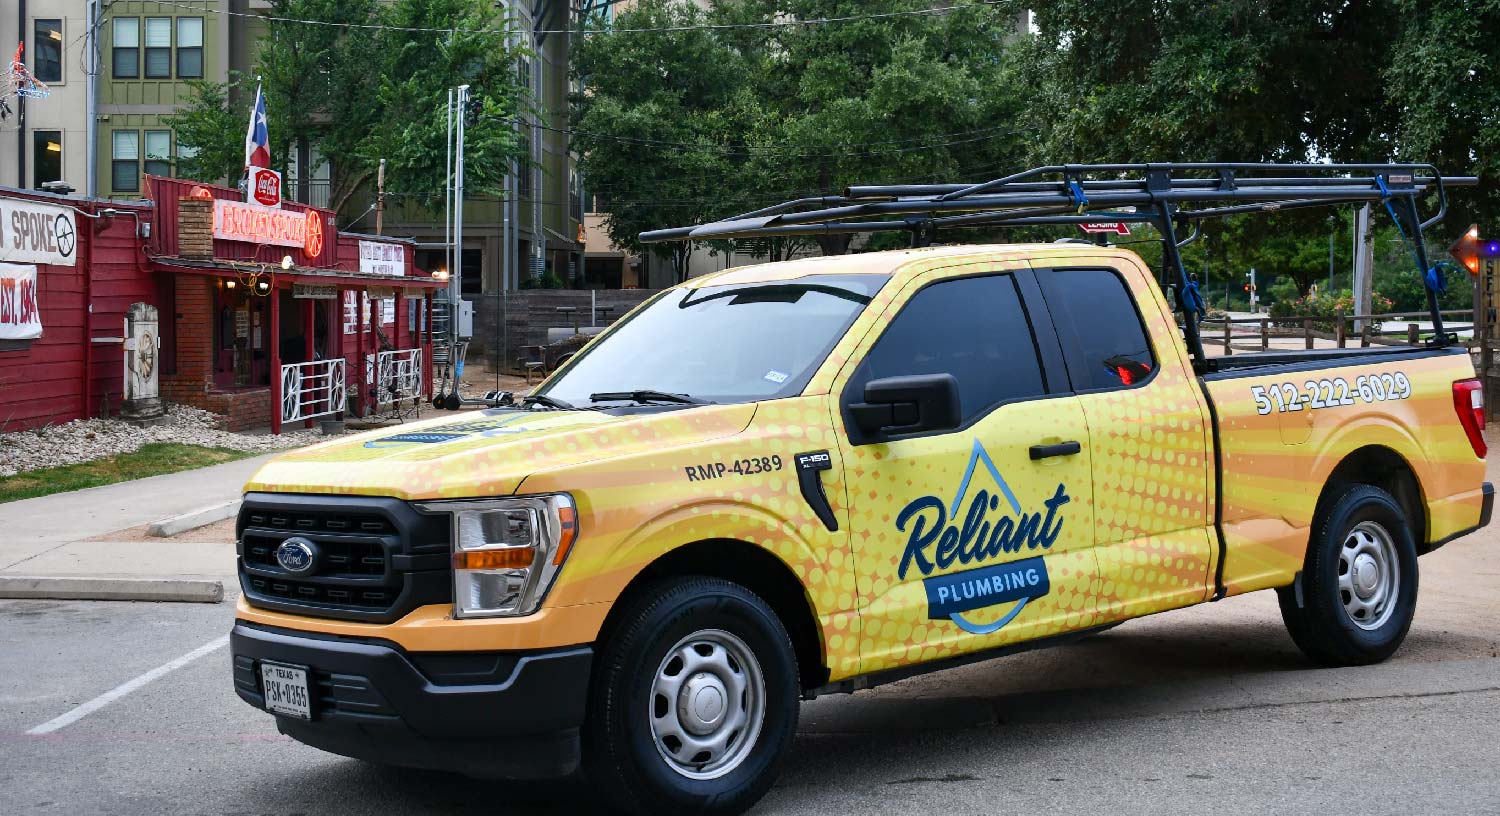 Reliant plumbing branded yellow truck parked in from of "the Ol Spoke" a popular dance hall in south austin